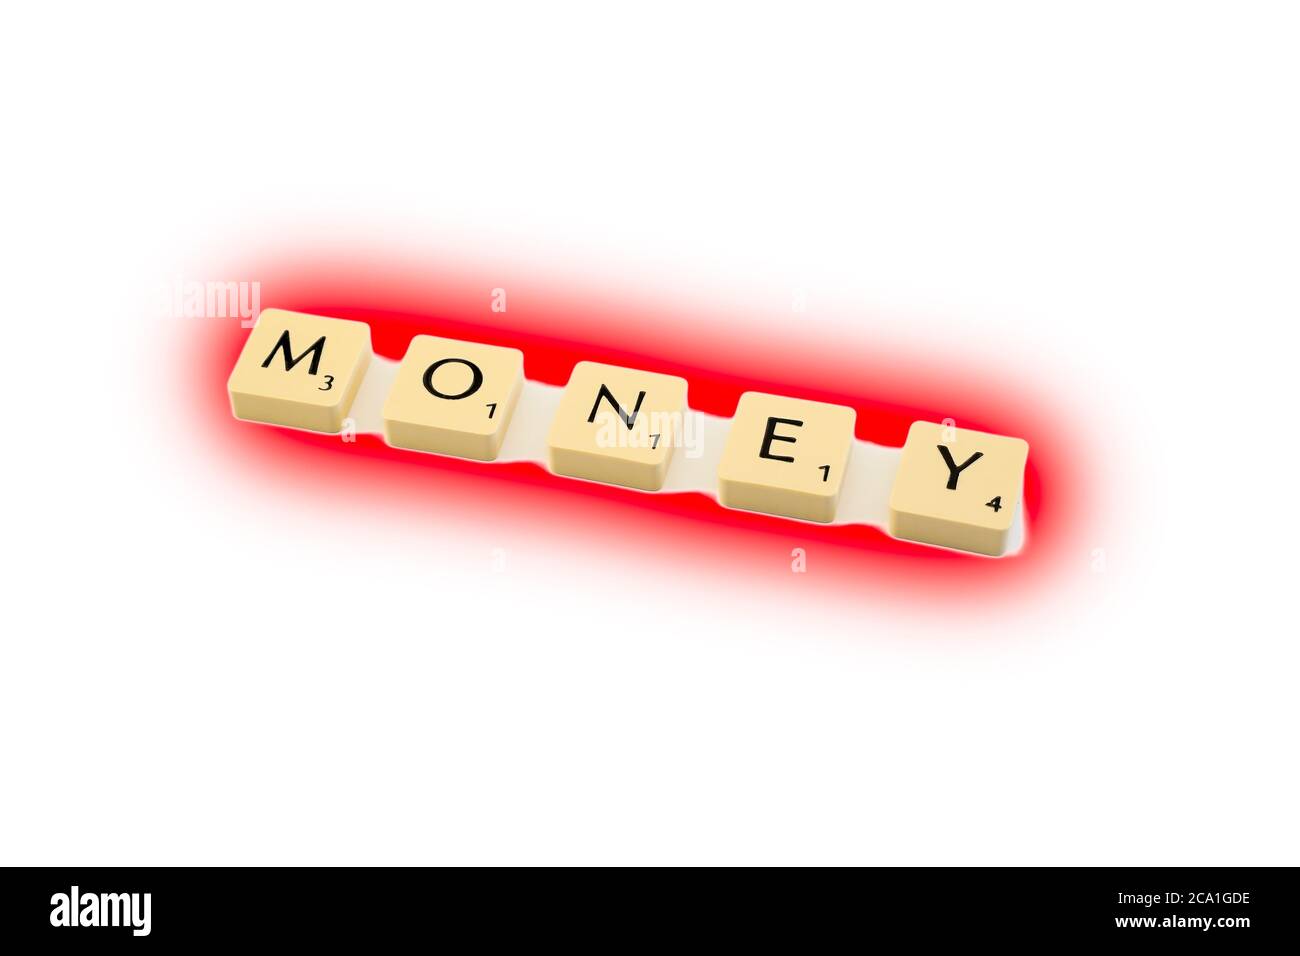 Scrabble board game letters spelling out the word MONEY highlighted in red, white background. Concept in the red, financial difficulty. Stock Photo